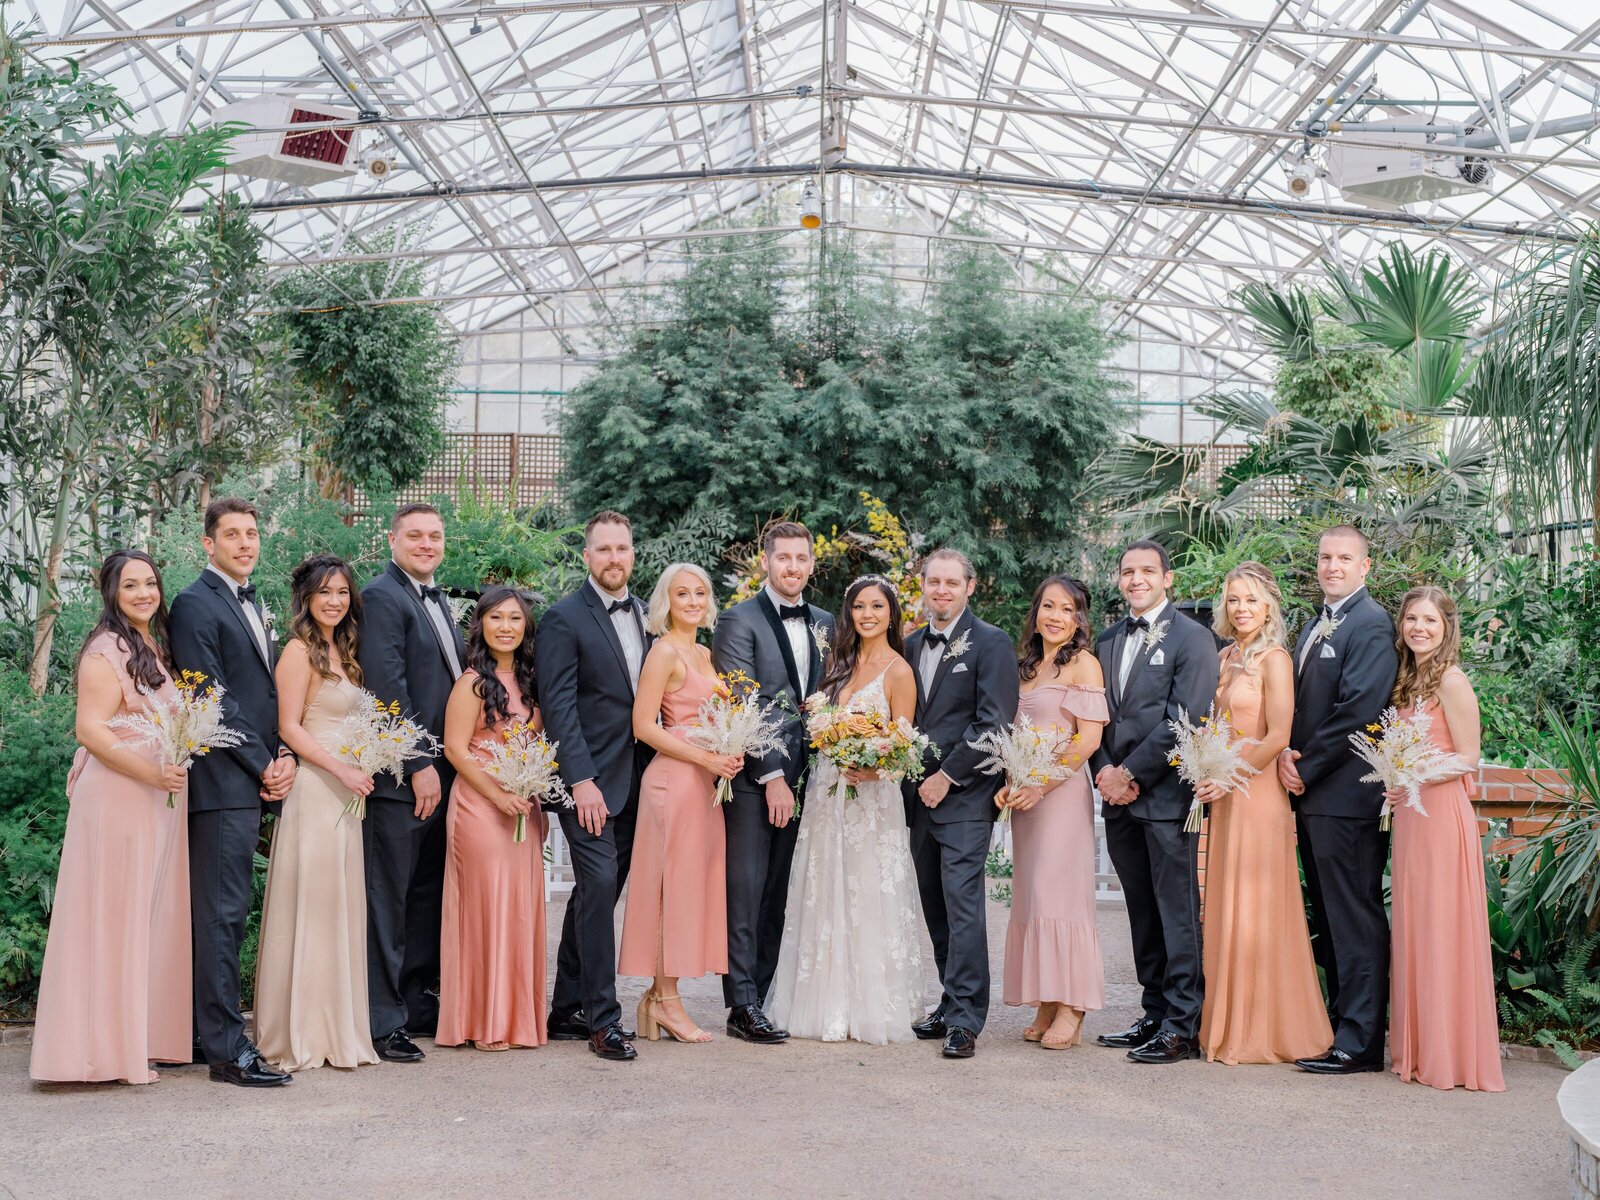 Melissa and Keith - Fairmount Park Horticulture Center - Magi Fisher - 380